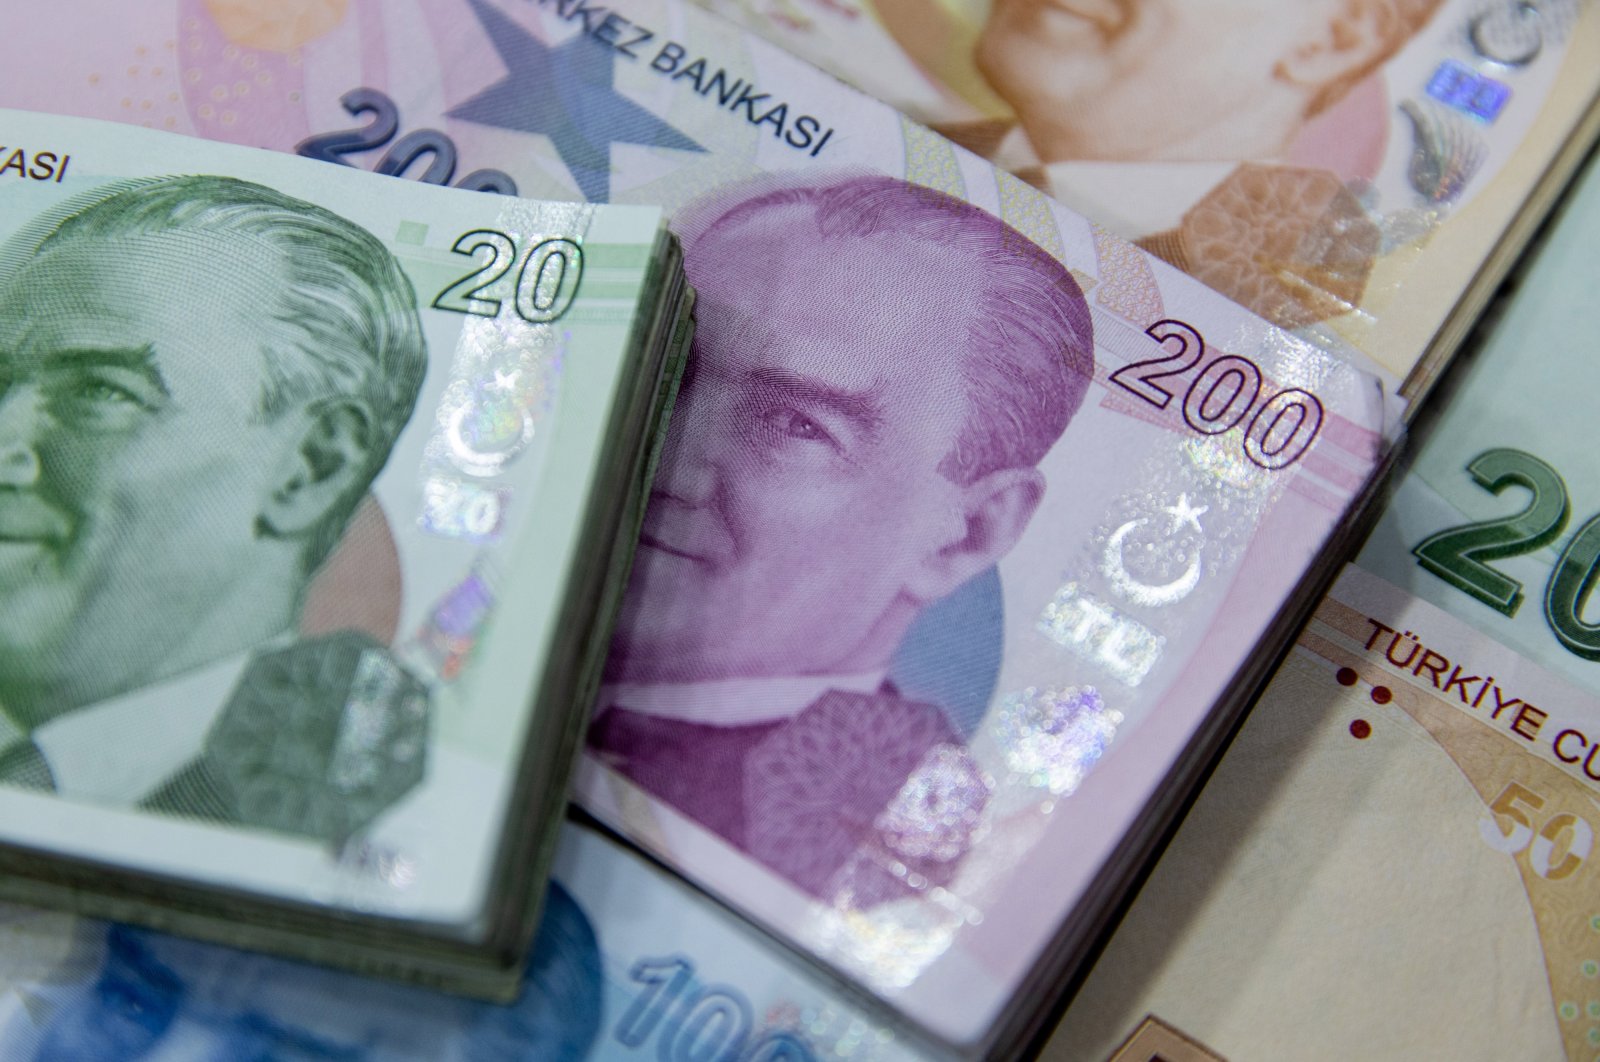 Turkish lira banknotes are seen in this undated stock photo. (Getty Images Photo)